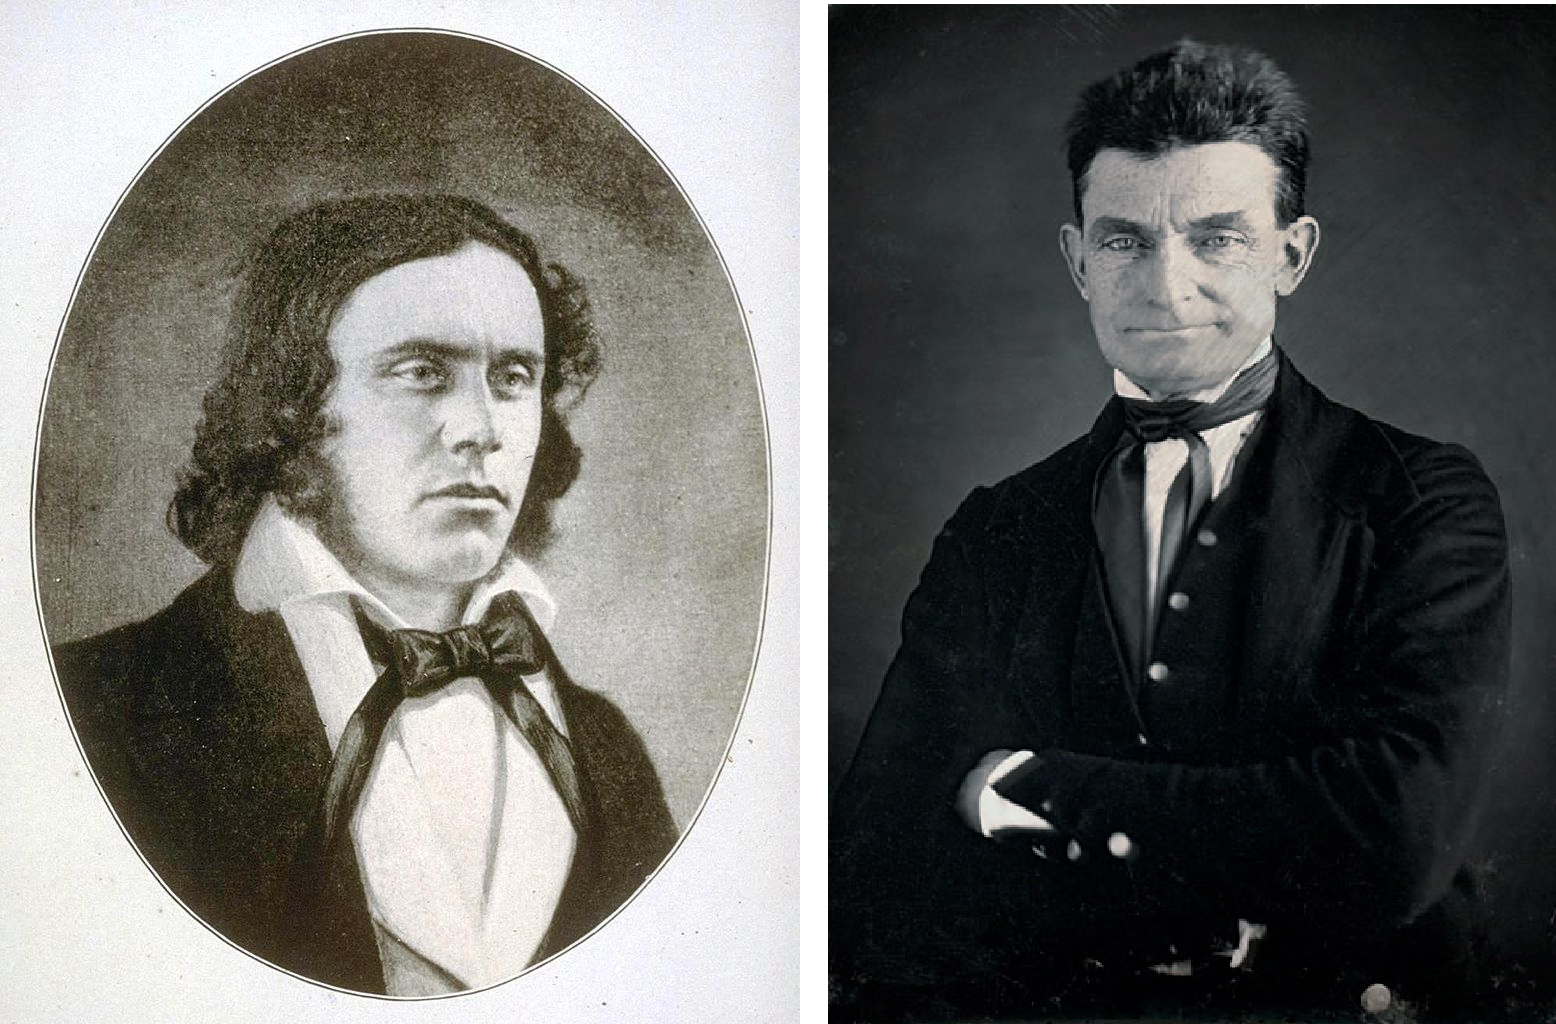 North Country Live presents The Real Story of John Brown, Richard Henry Dana and an Adirondack meeting